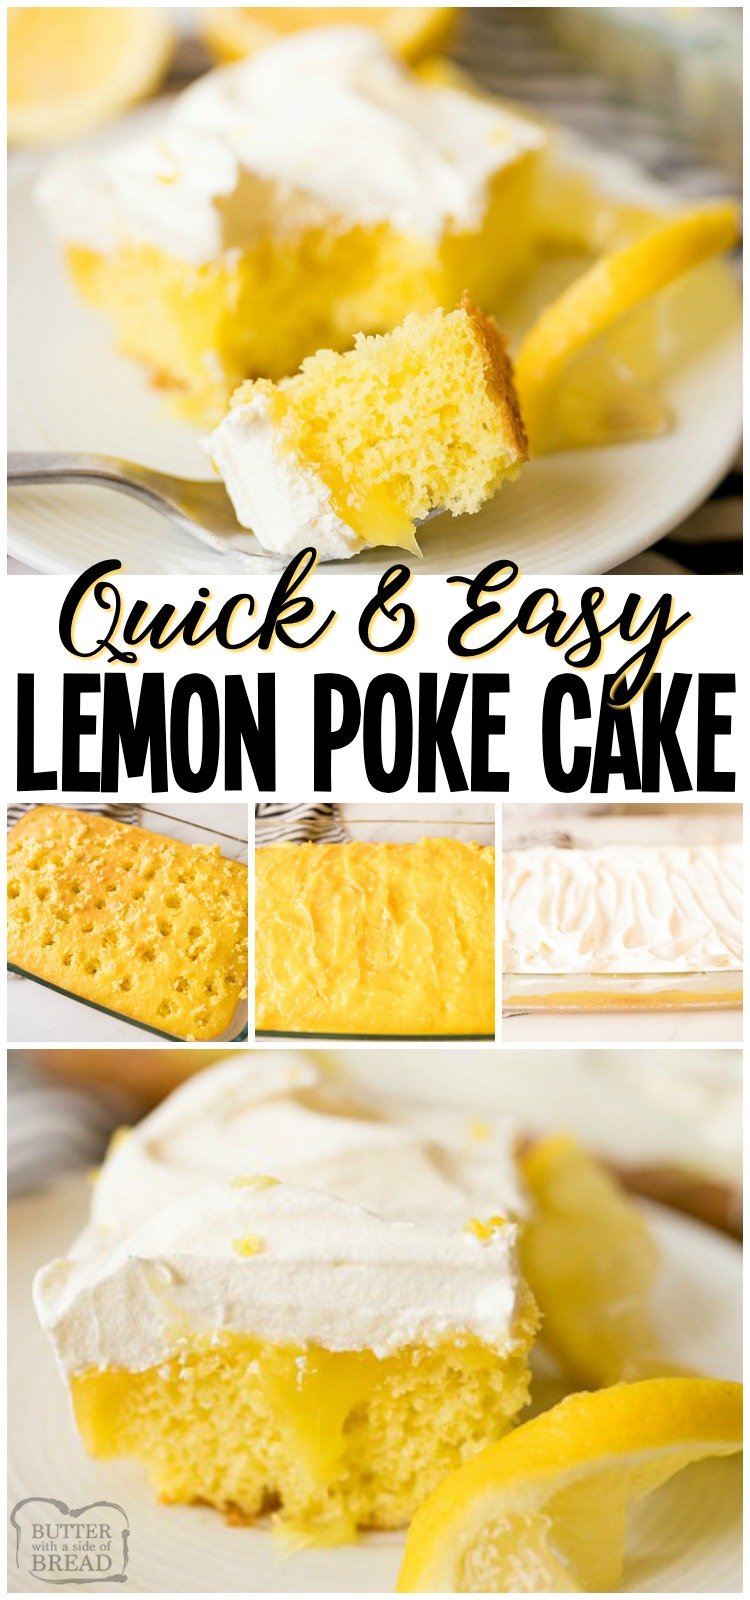 Lemon Poke Cake made with 3 ingredients and so simple! Delicious, easy poke cake recipe with a sweet lemon flavor topped with whipped cream. #lemon #cake #pokecake #easy #dessert #recipe from BUTTER WITH A SIDE OF BREAD